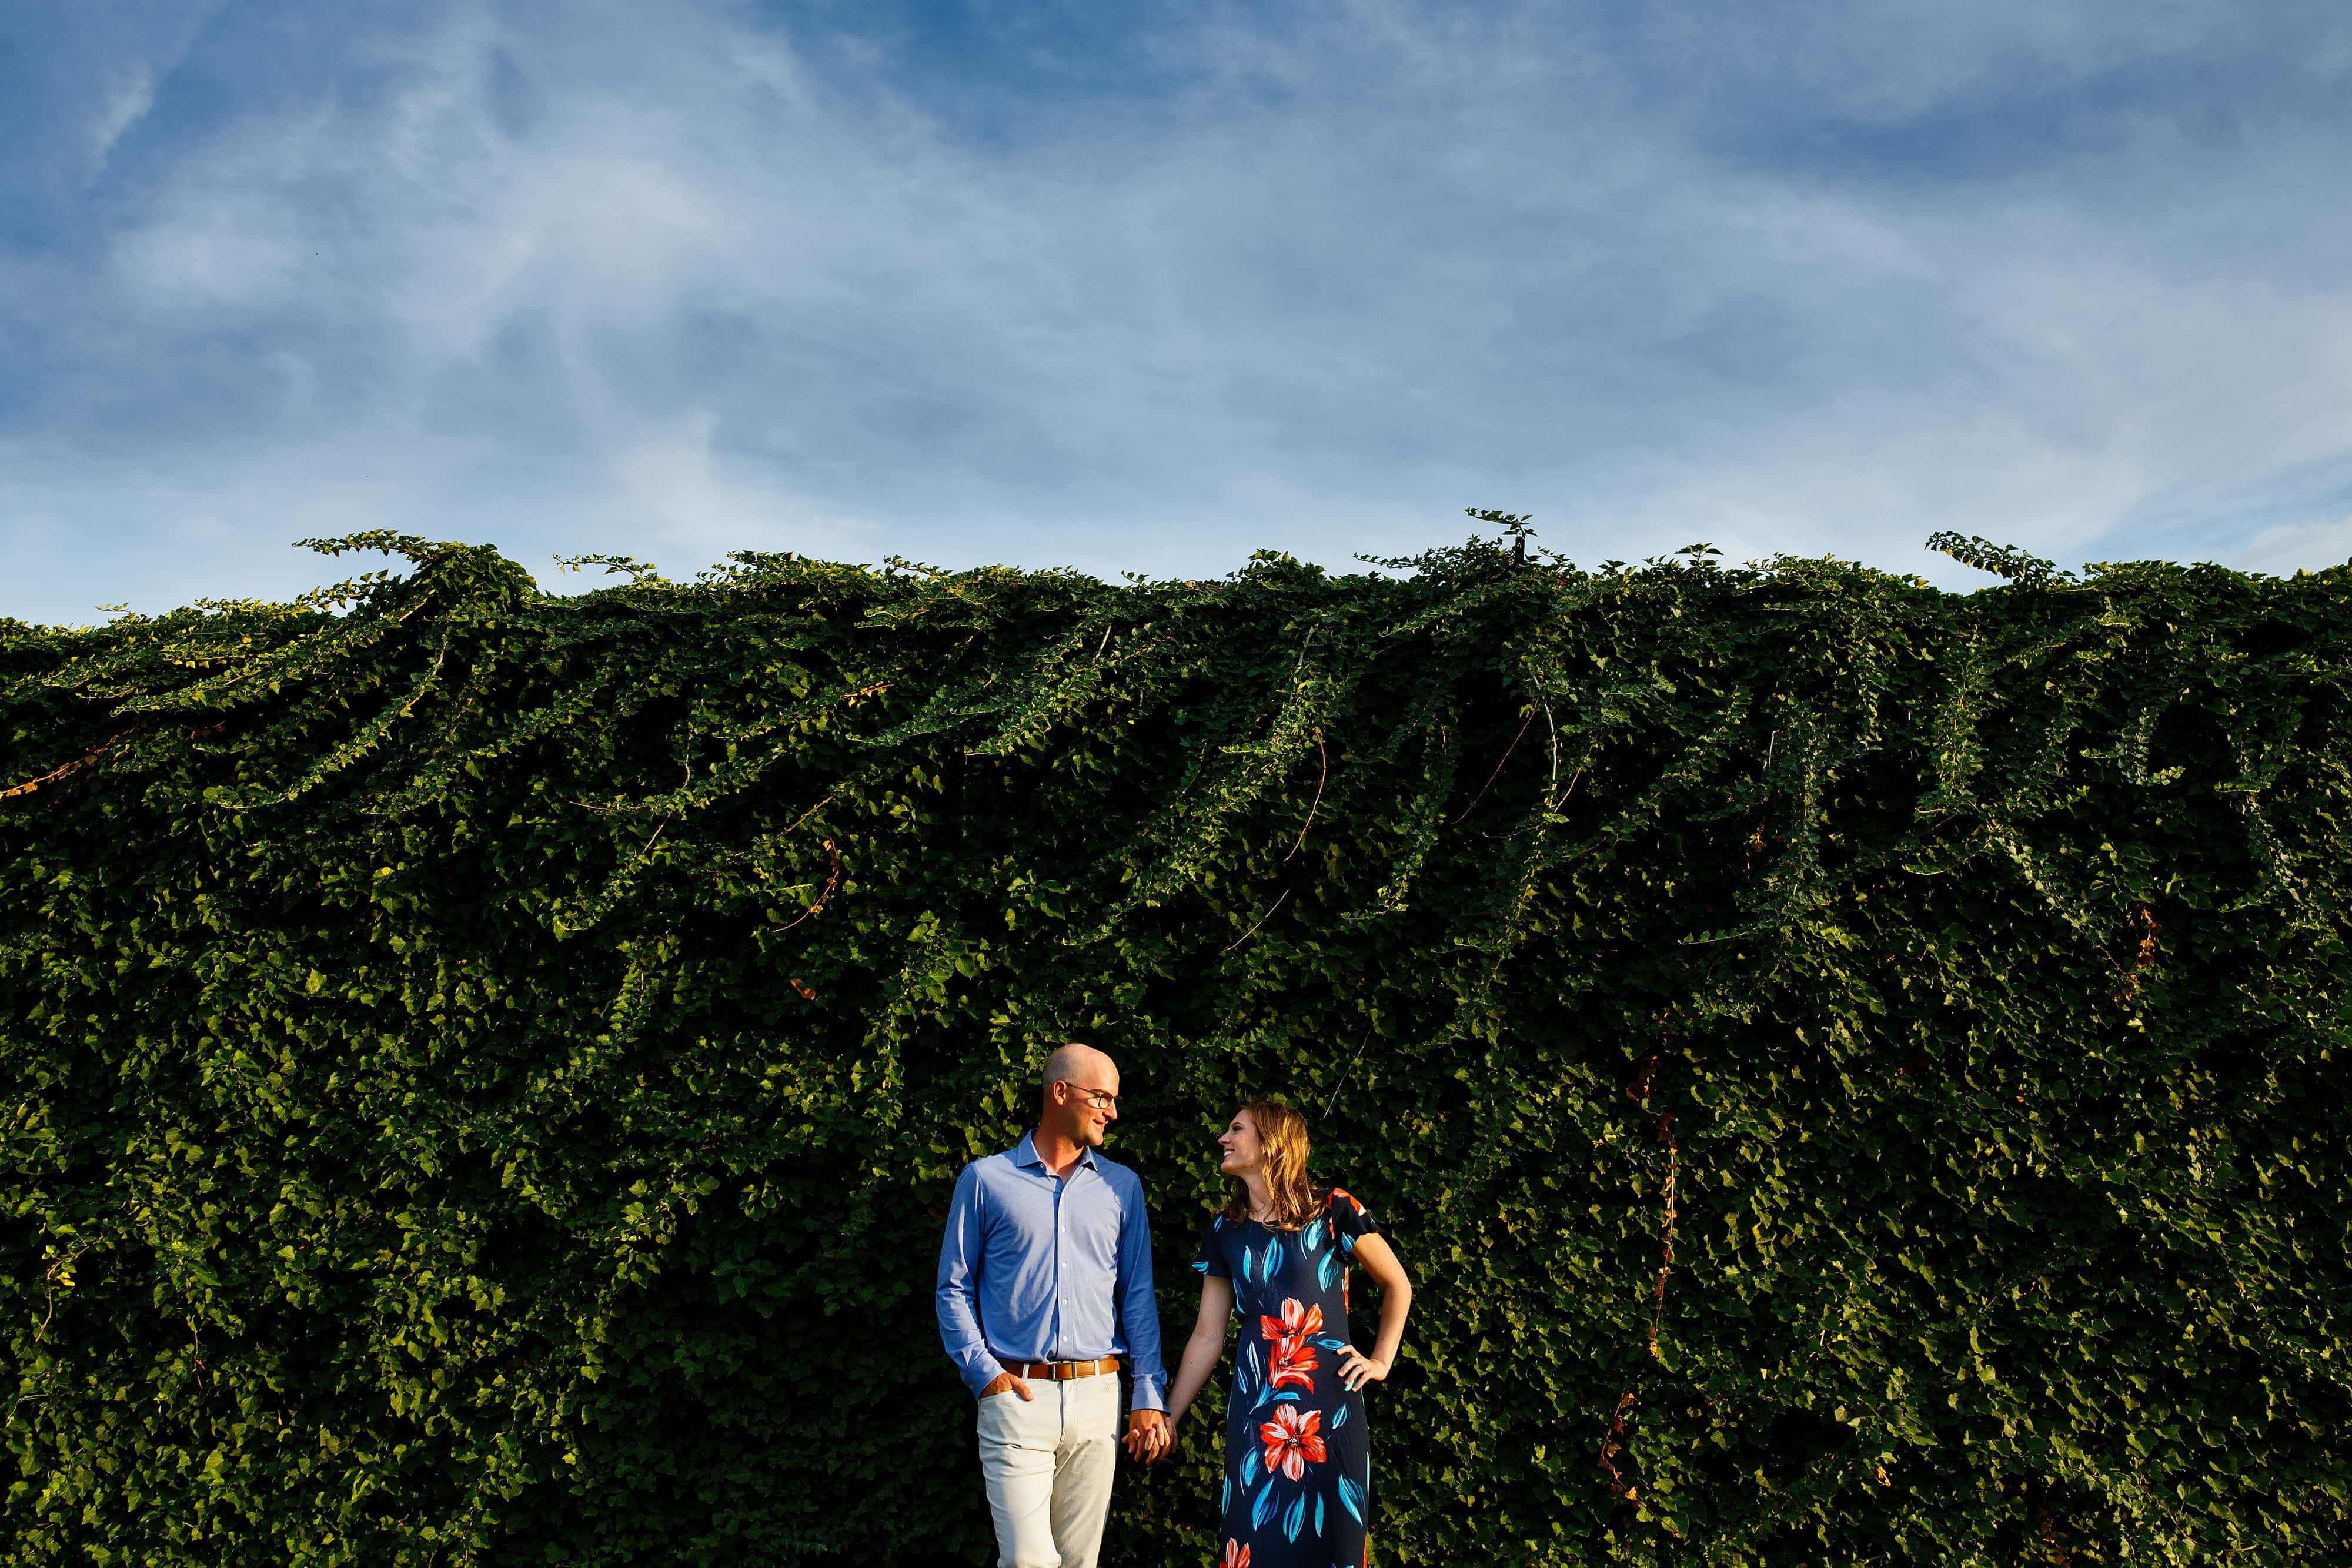 Cody and Erica pose during their summer engagement photos in downtown Royal Oak, Michigan